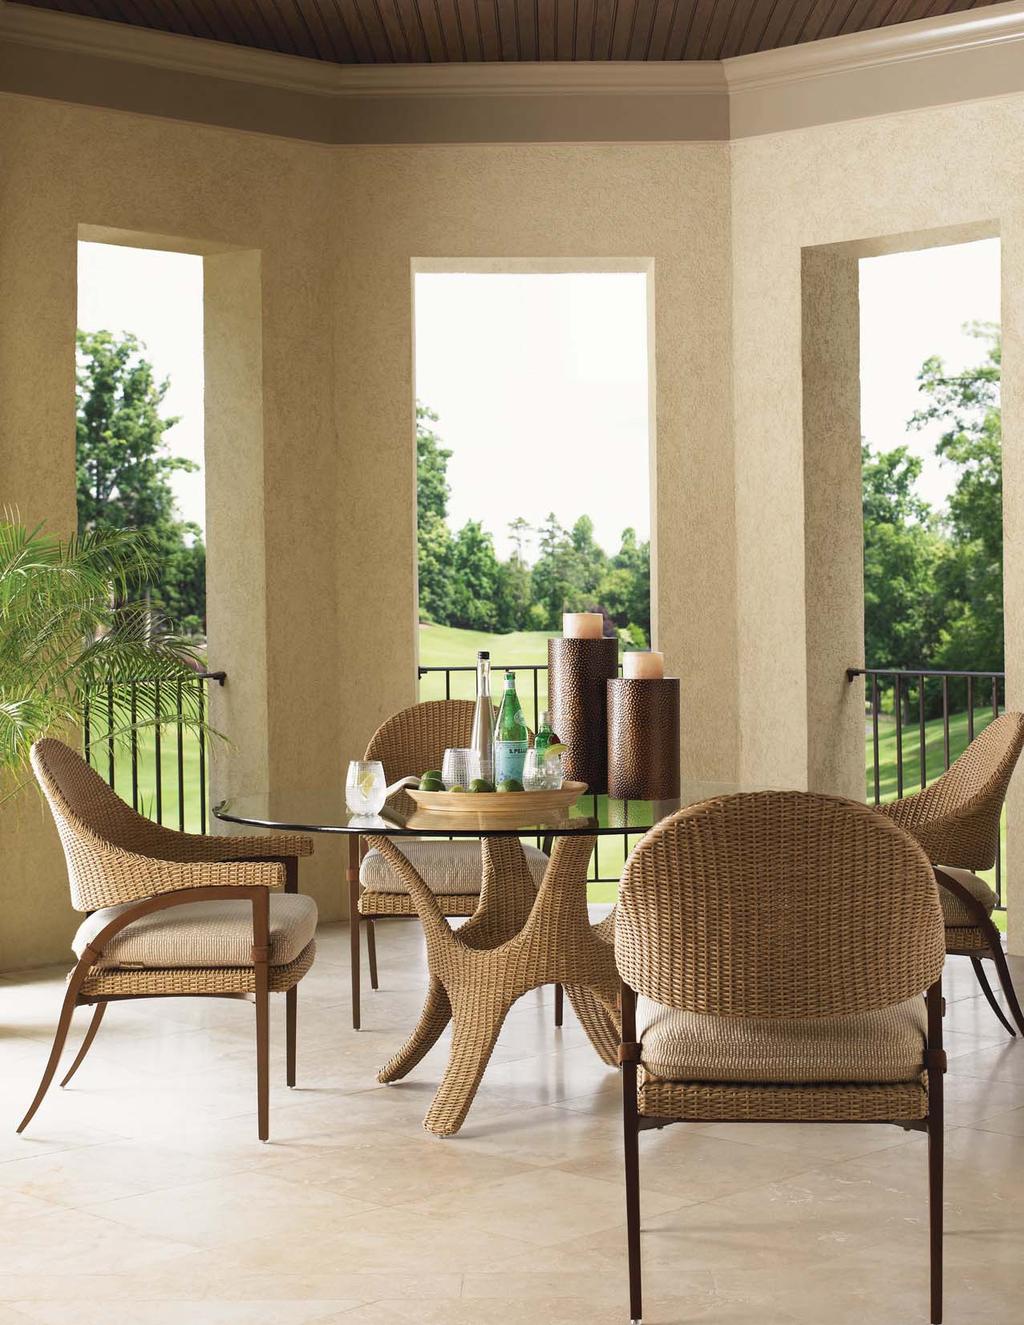 Outdoor dining has never been more stylish. 3220-13 Dining Chair 25W x 26.5D x 35.5H in.